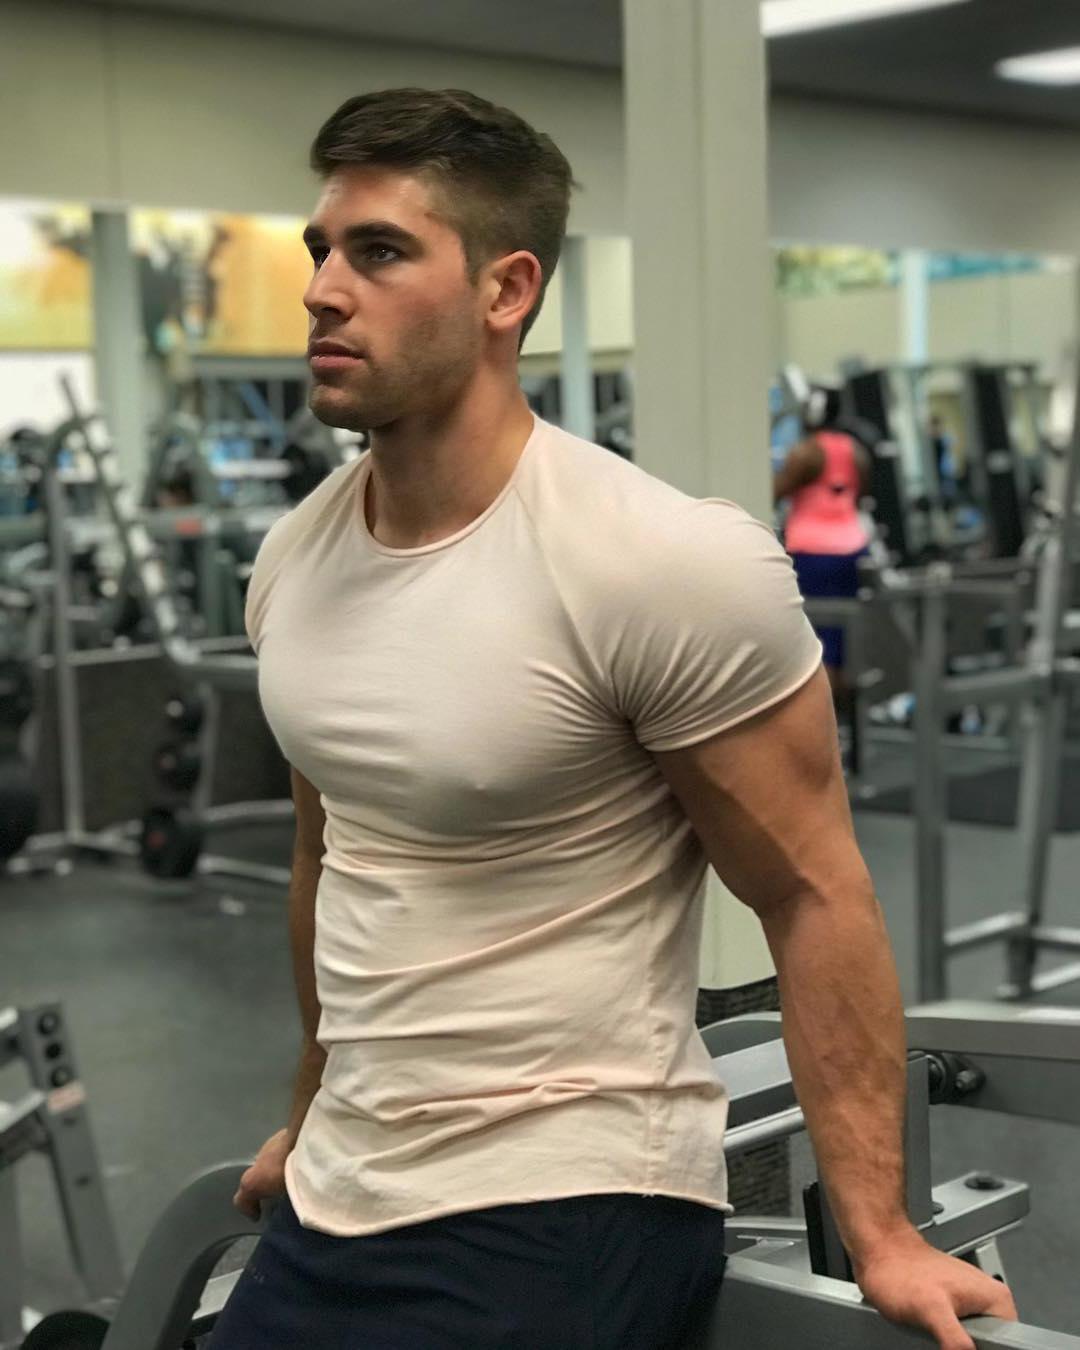 strong-gym-dude-muscle-tshirt-huge-pecs-swole-arms-visible-male-nipples